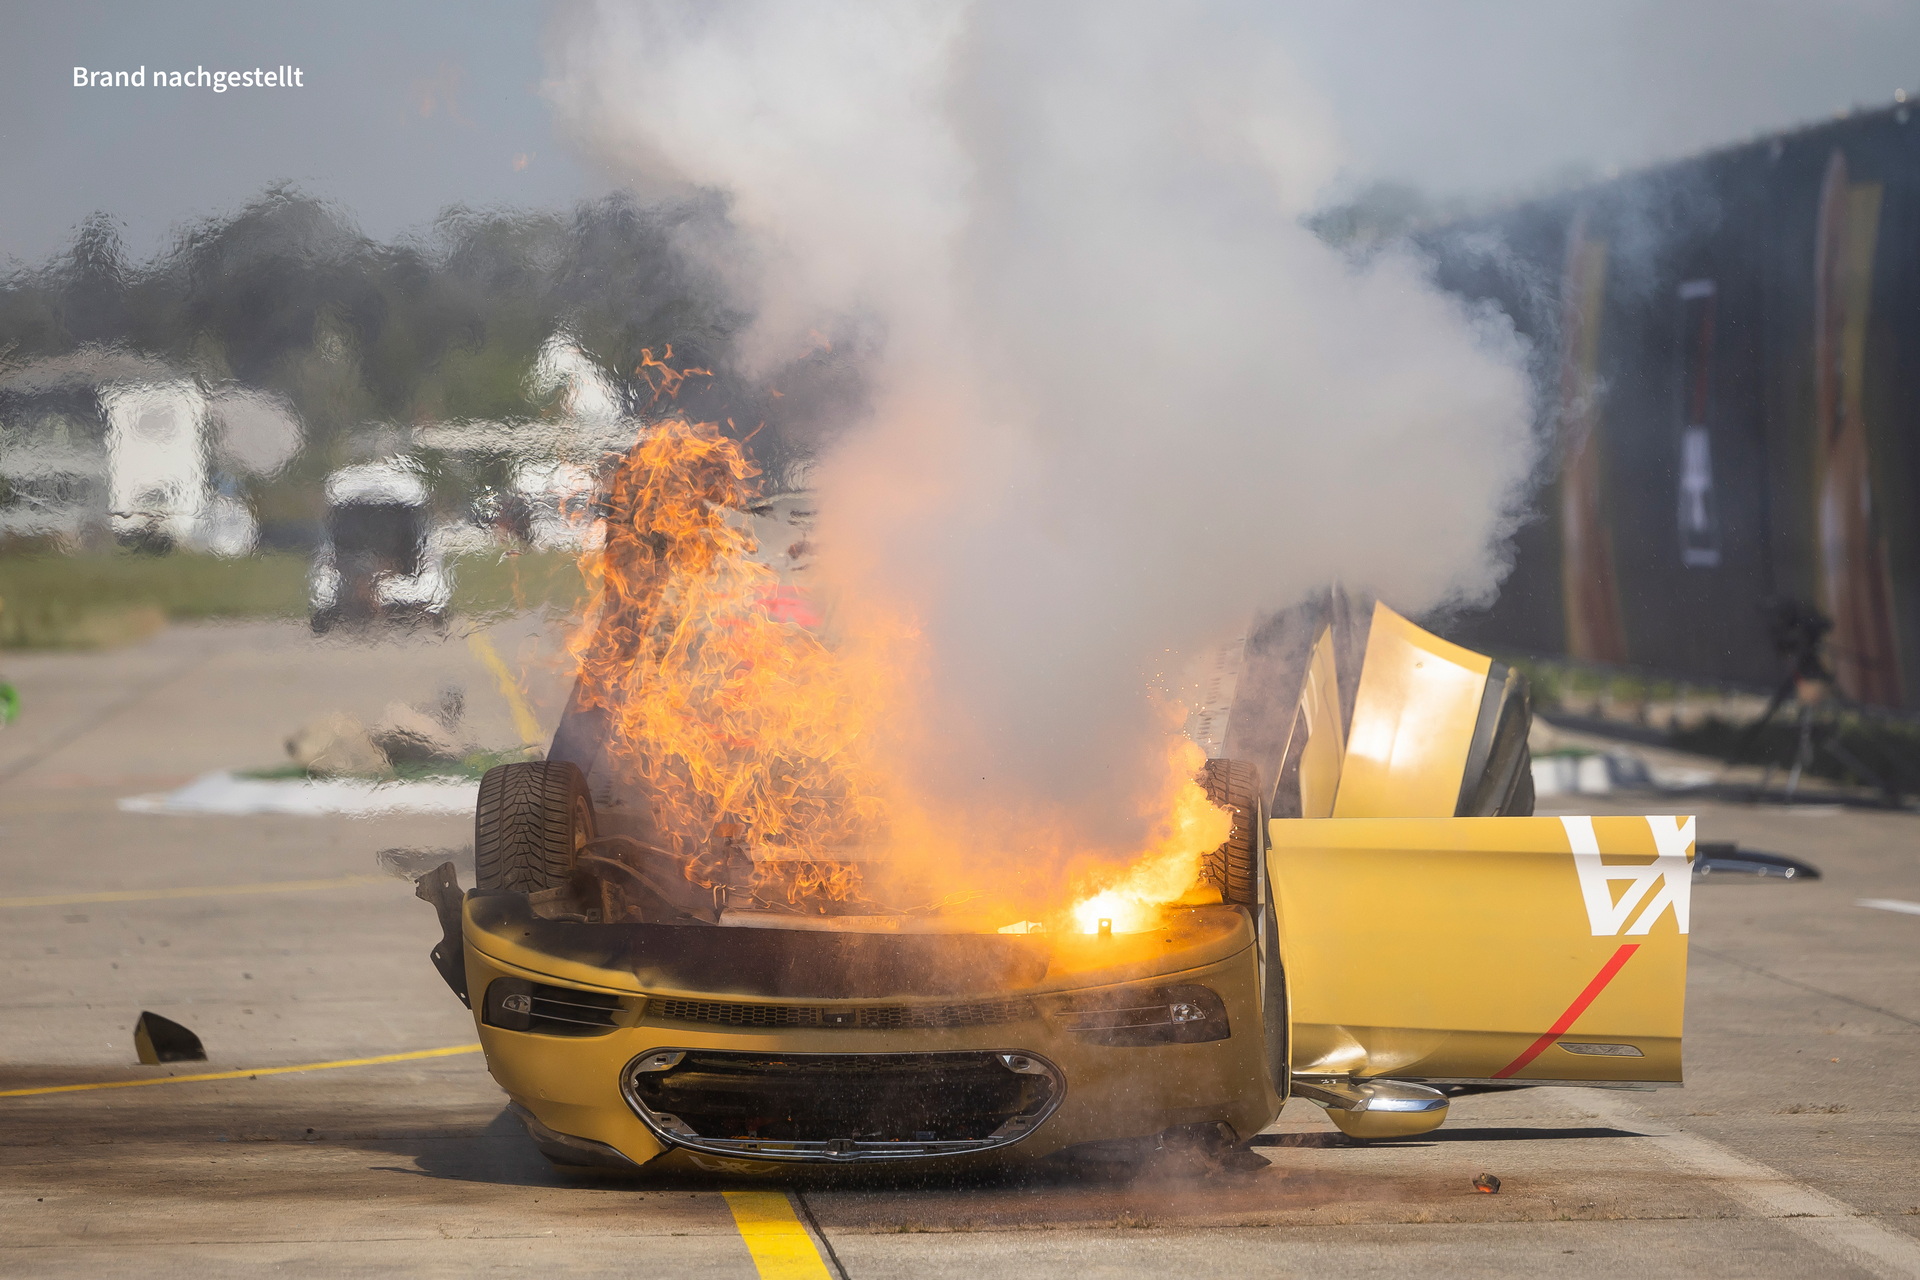 EVs build on crash tests for gas-powered cars